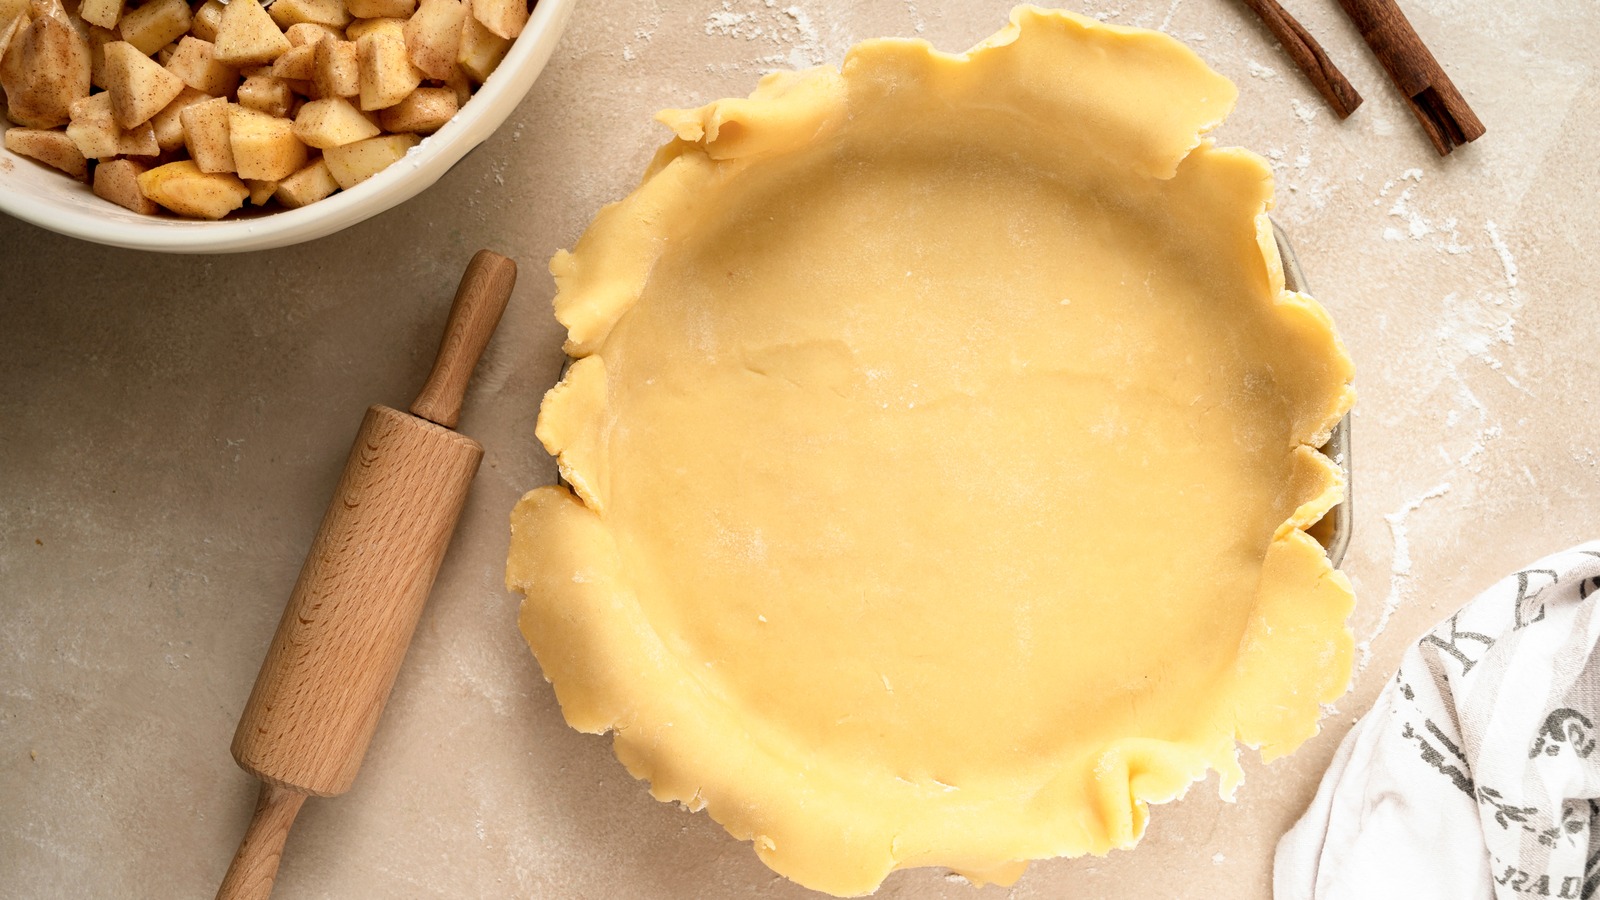 https://www.thedailymeal.com/img/gallery/the-trick-for-preventing-sticky-pie-dough/l-intro-1671454893.jpg